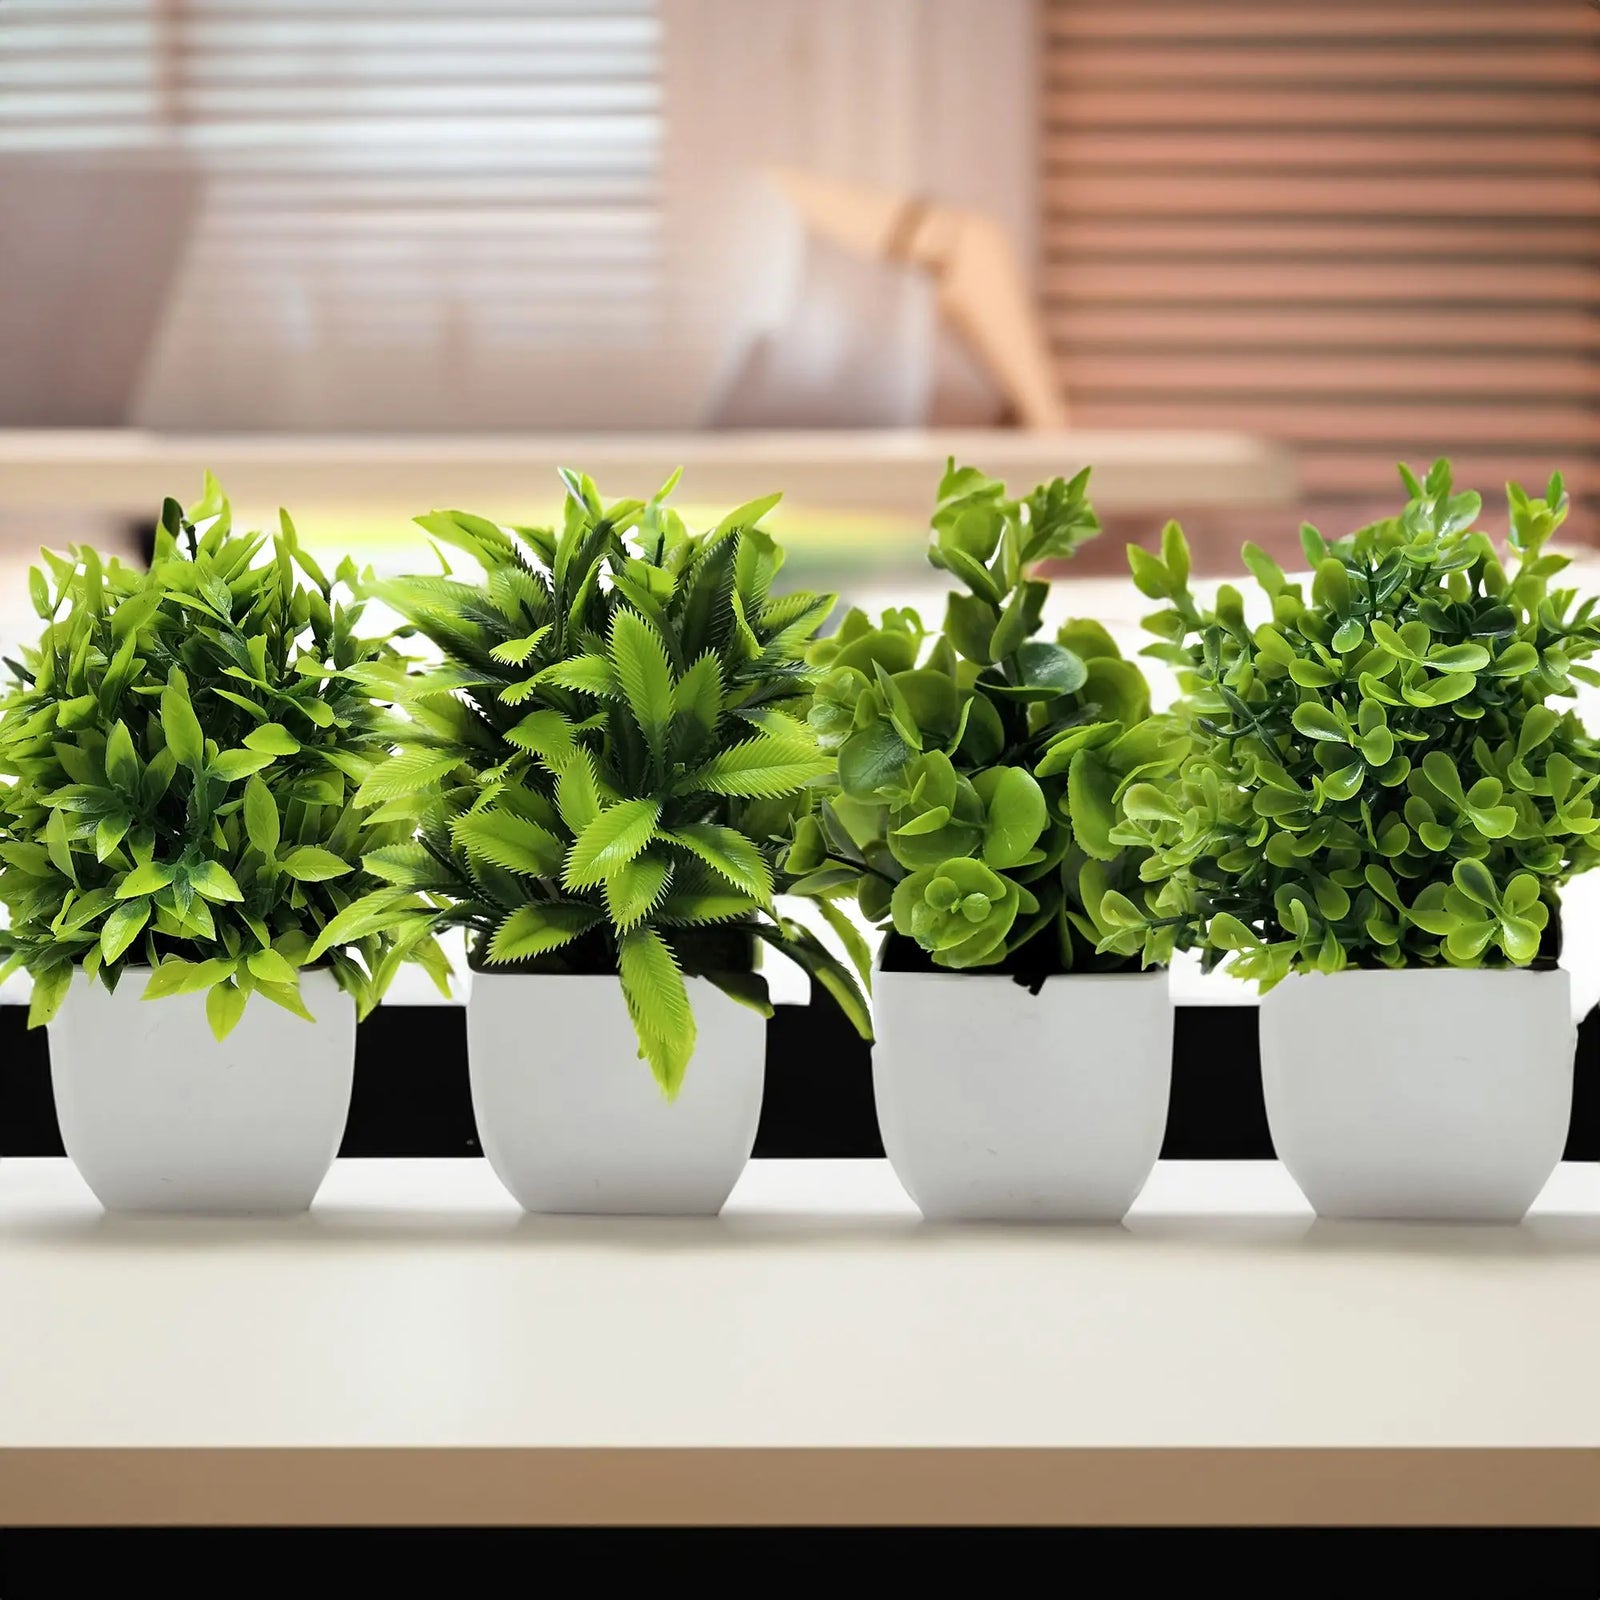 Tree Window Sill Office Table Desktop Decoration Plastic Garden Fake Plant Potted Home Decor